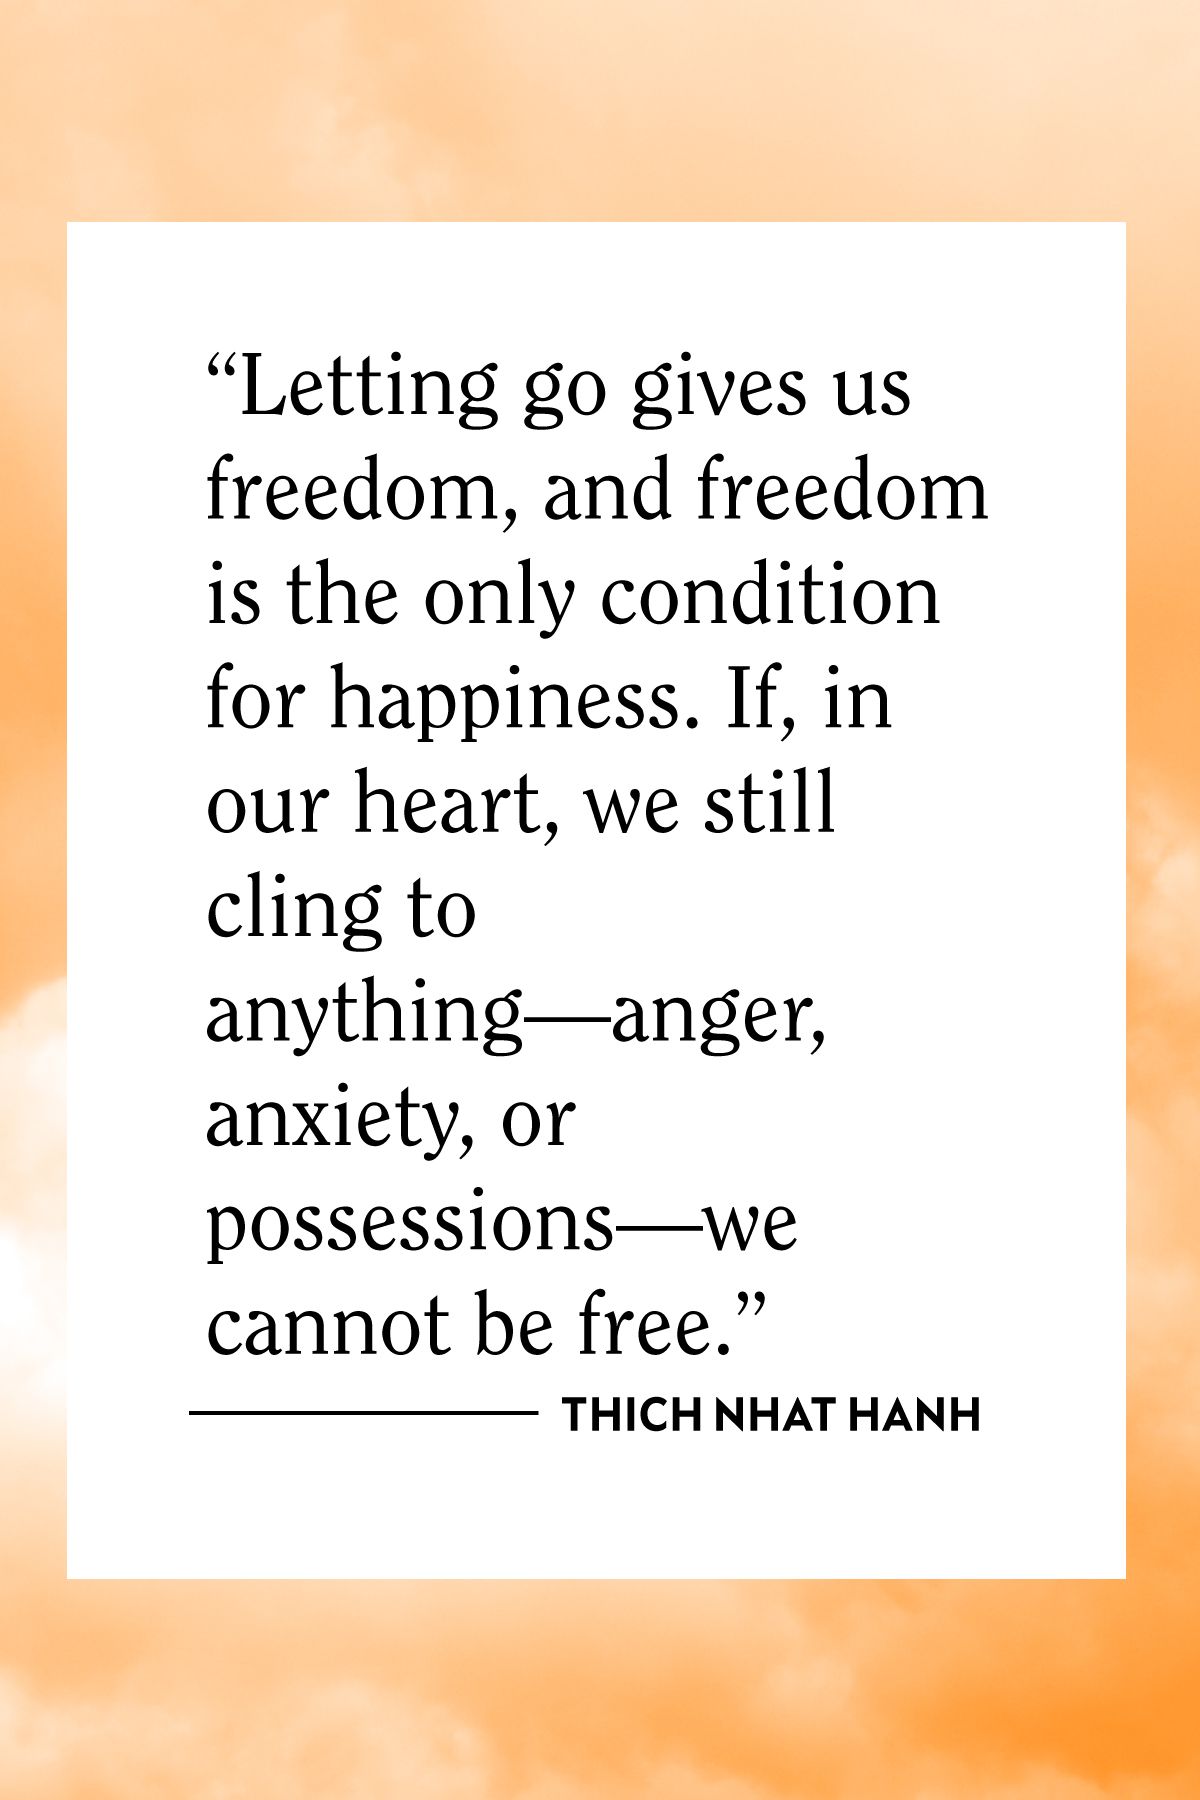 Thich Nhat Hanh Quotes On Hope - Gerta Juliana